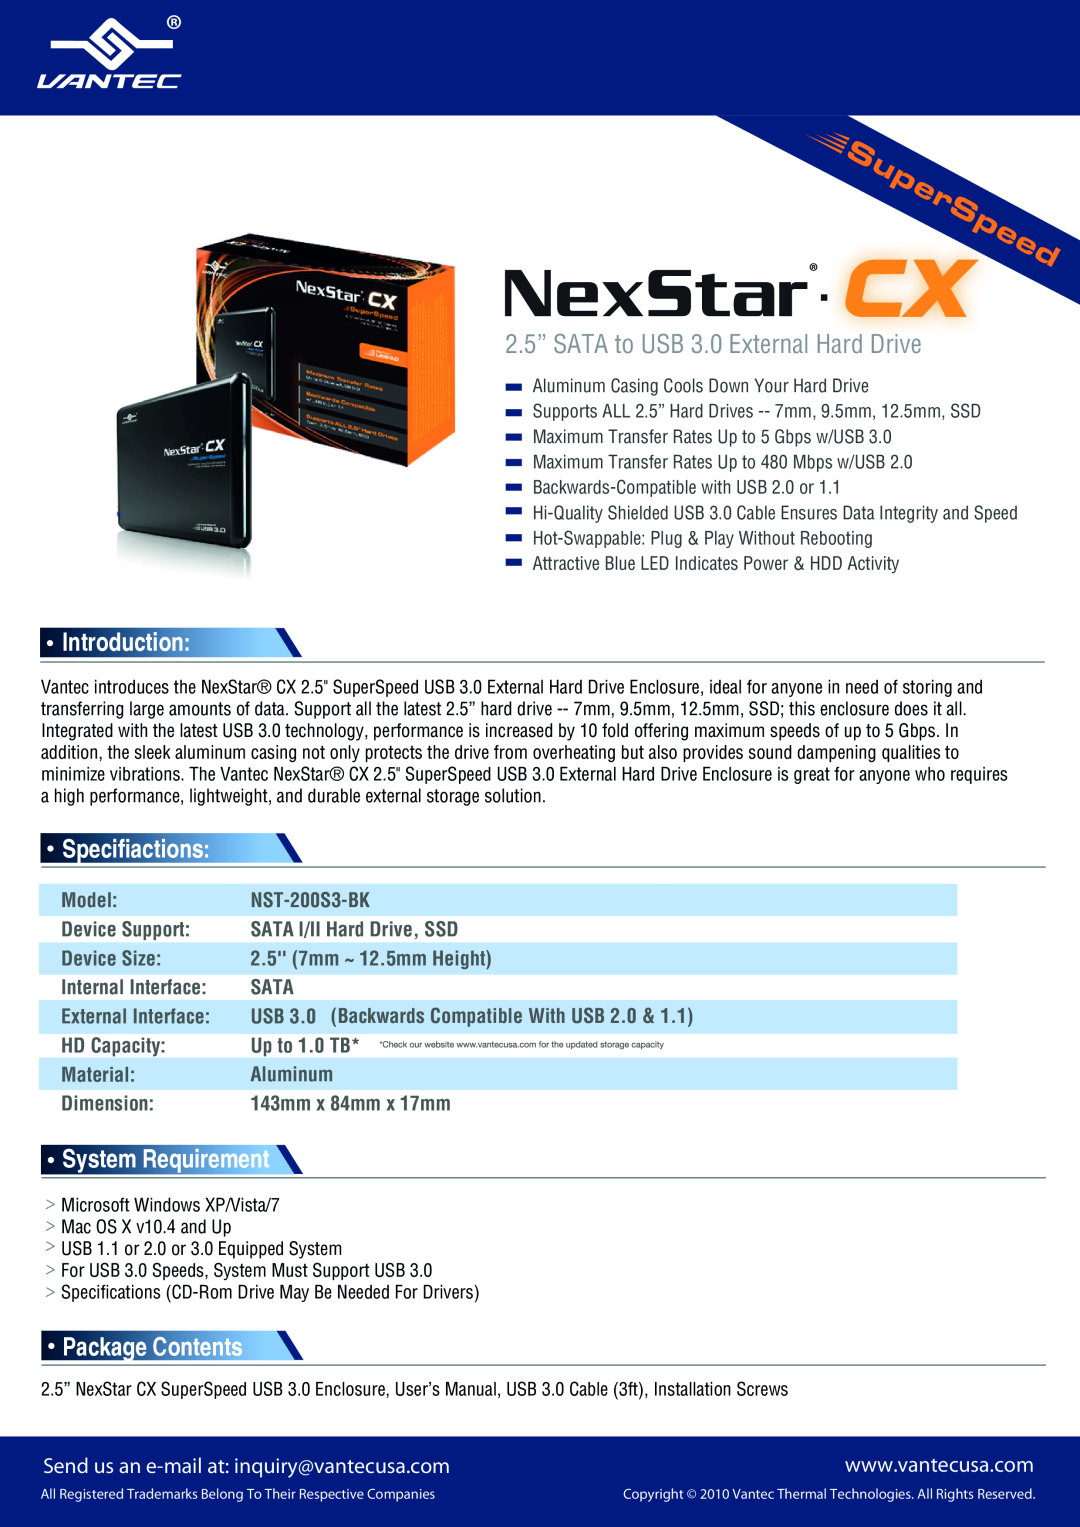 Nexstar NST-200S3-BK specifications 2.5” SATA to USB 3.0 External Hard Drive, Introduction, Specifiactions 